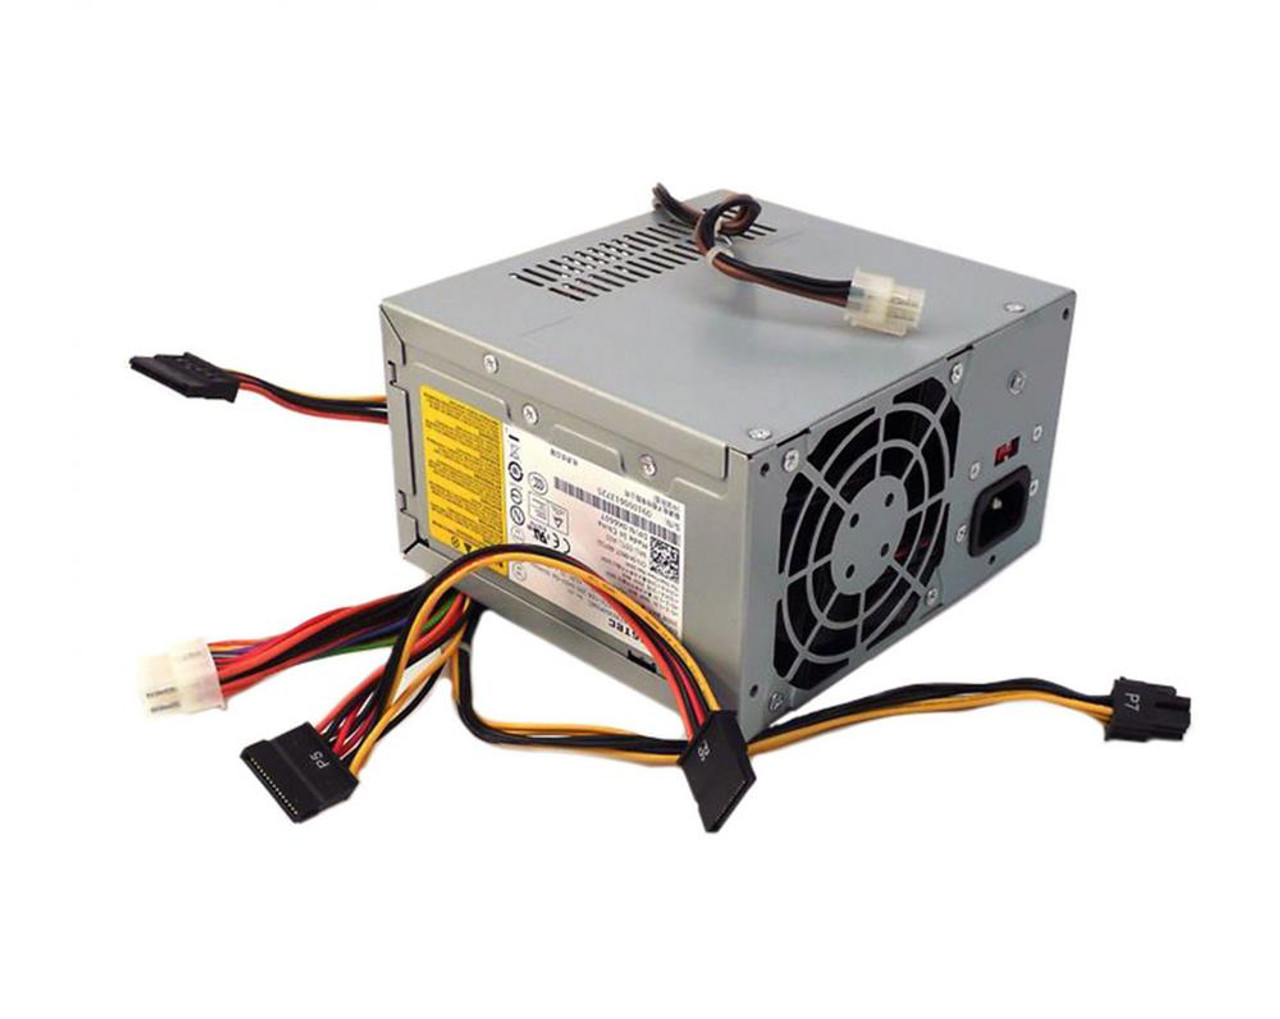 0K660T Dell 350-Watts Power Supply for Vostro 430 and Precision T1500